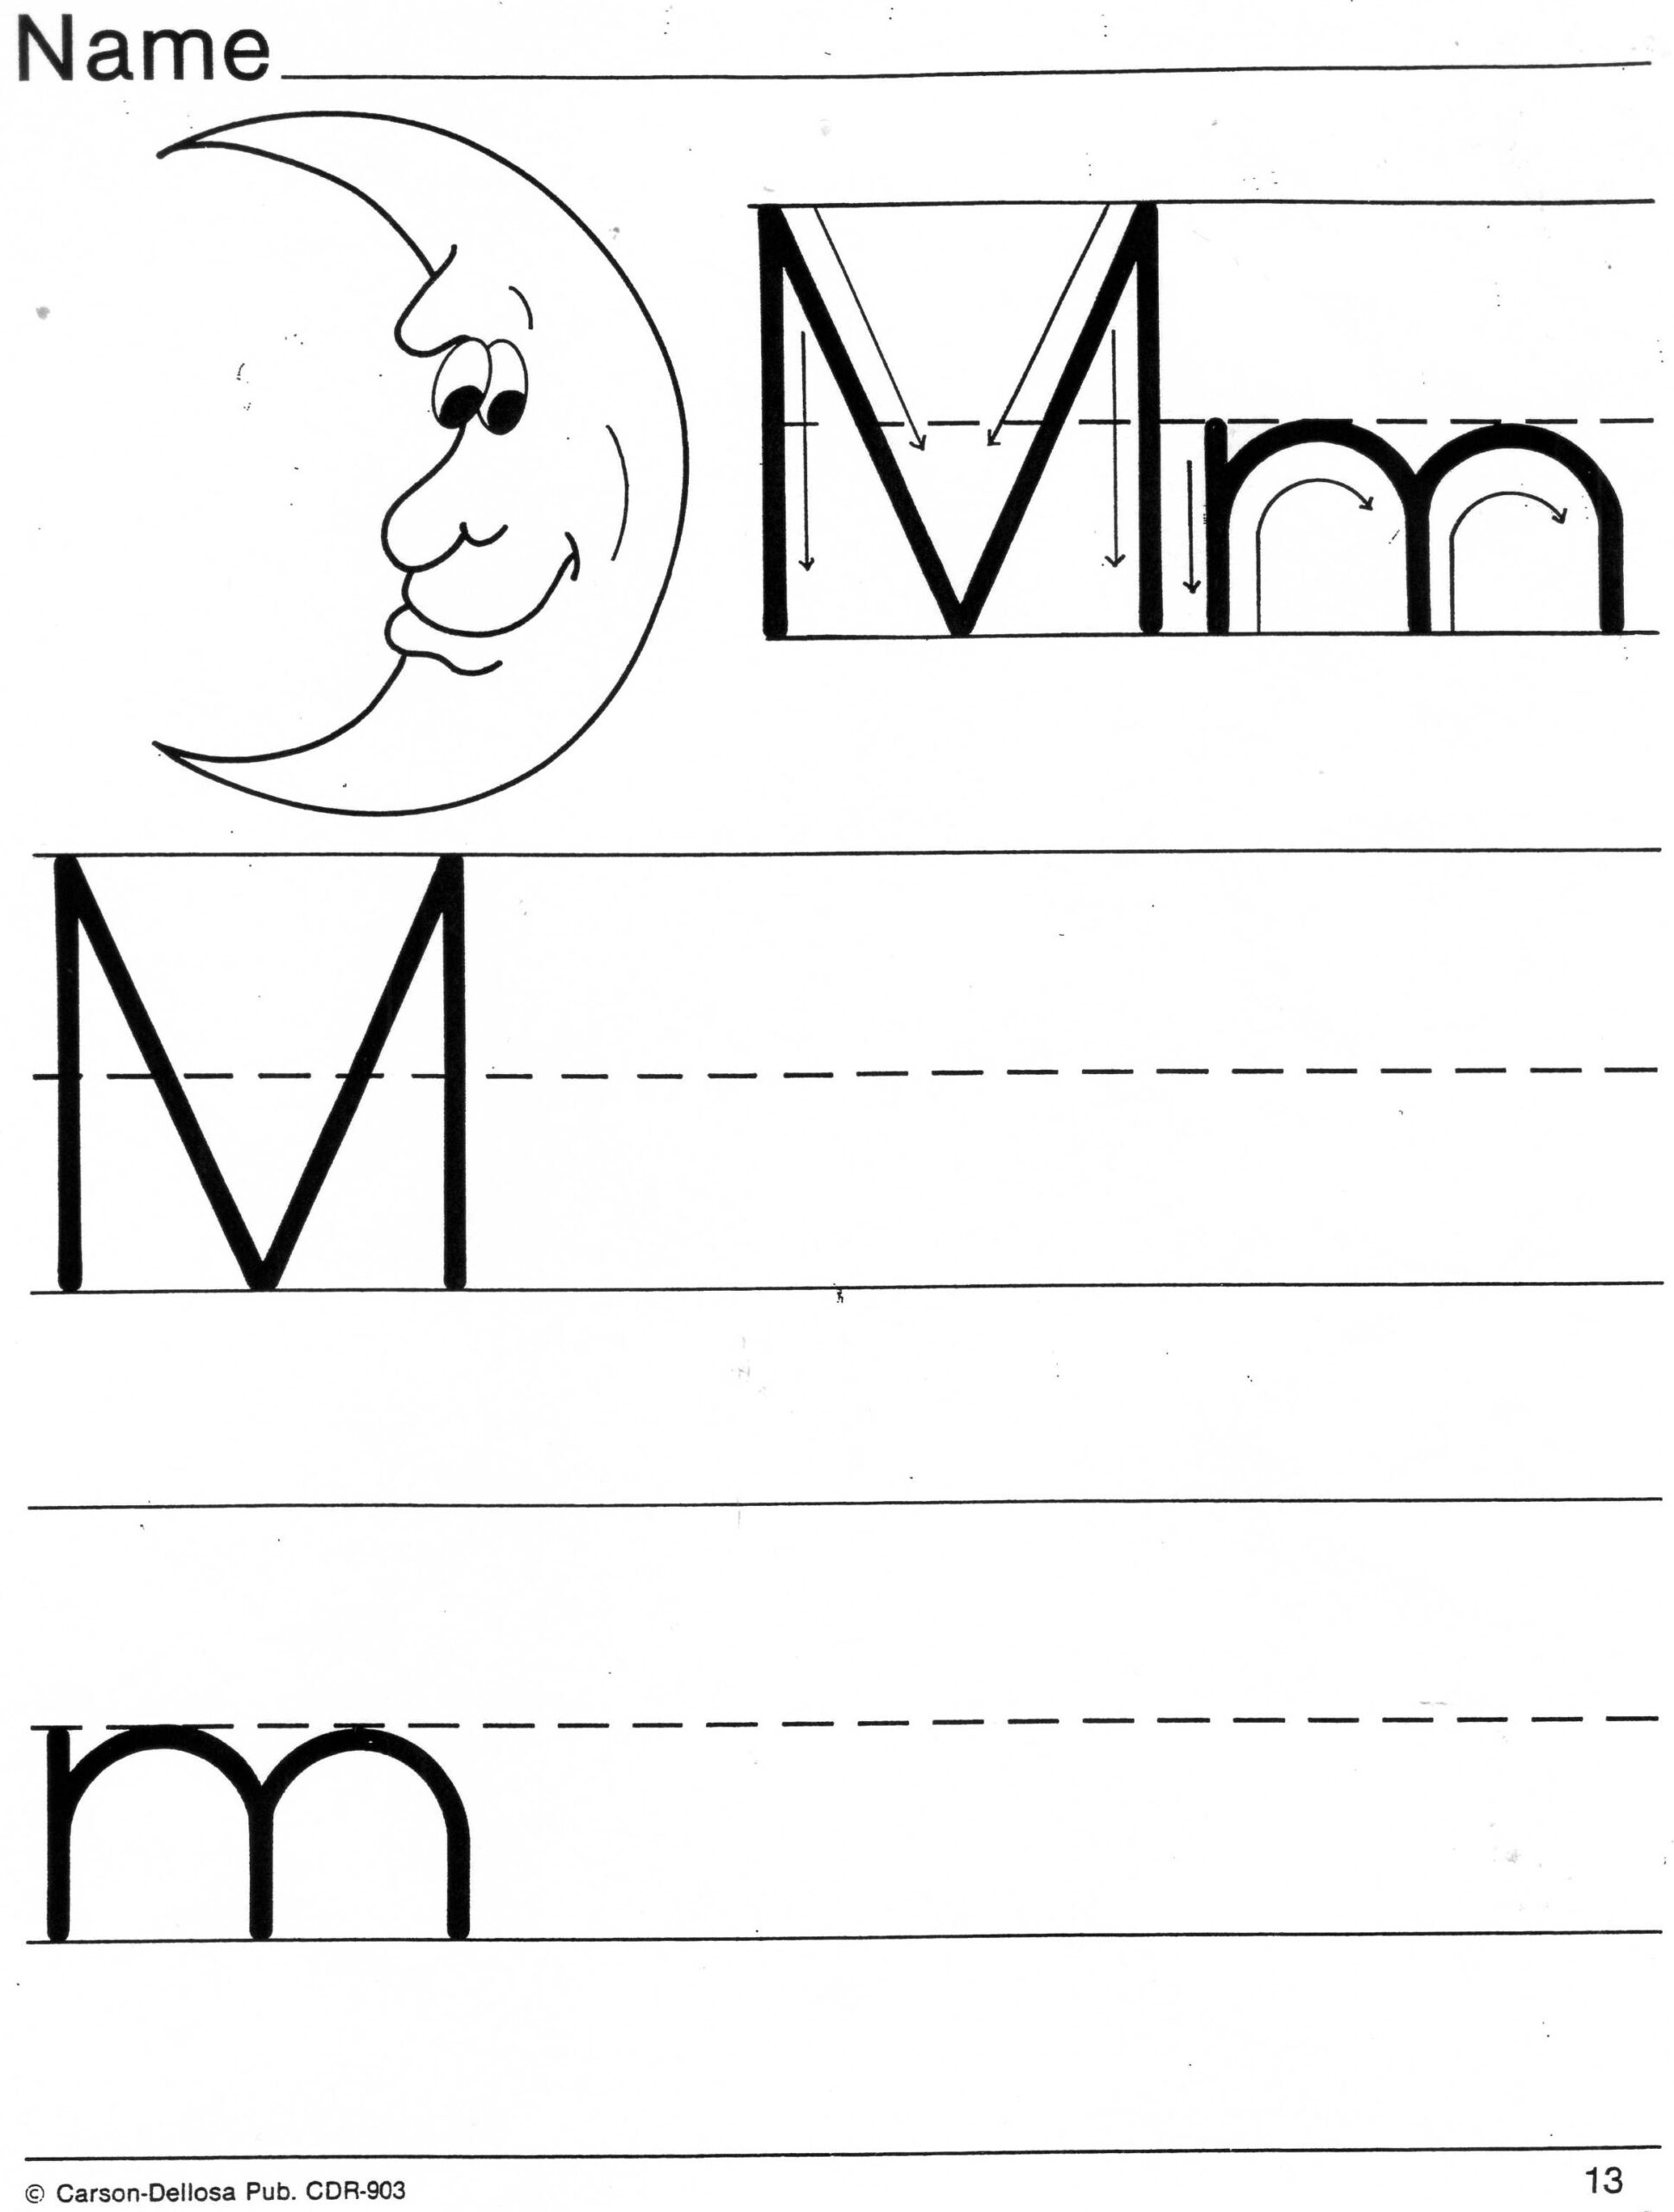 Practice Sheets For Parents intended for Letter Tracing M